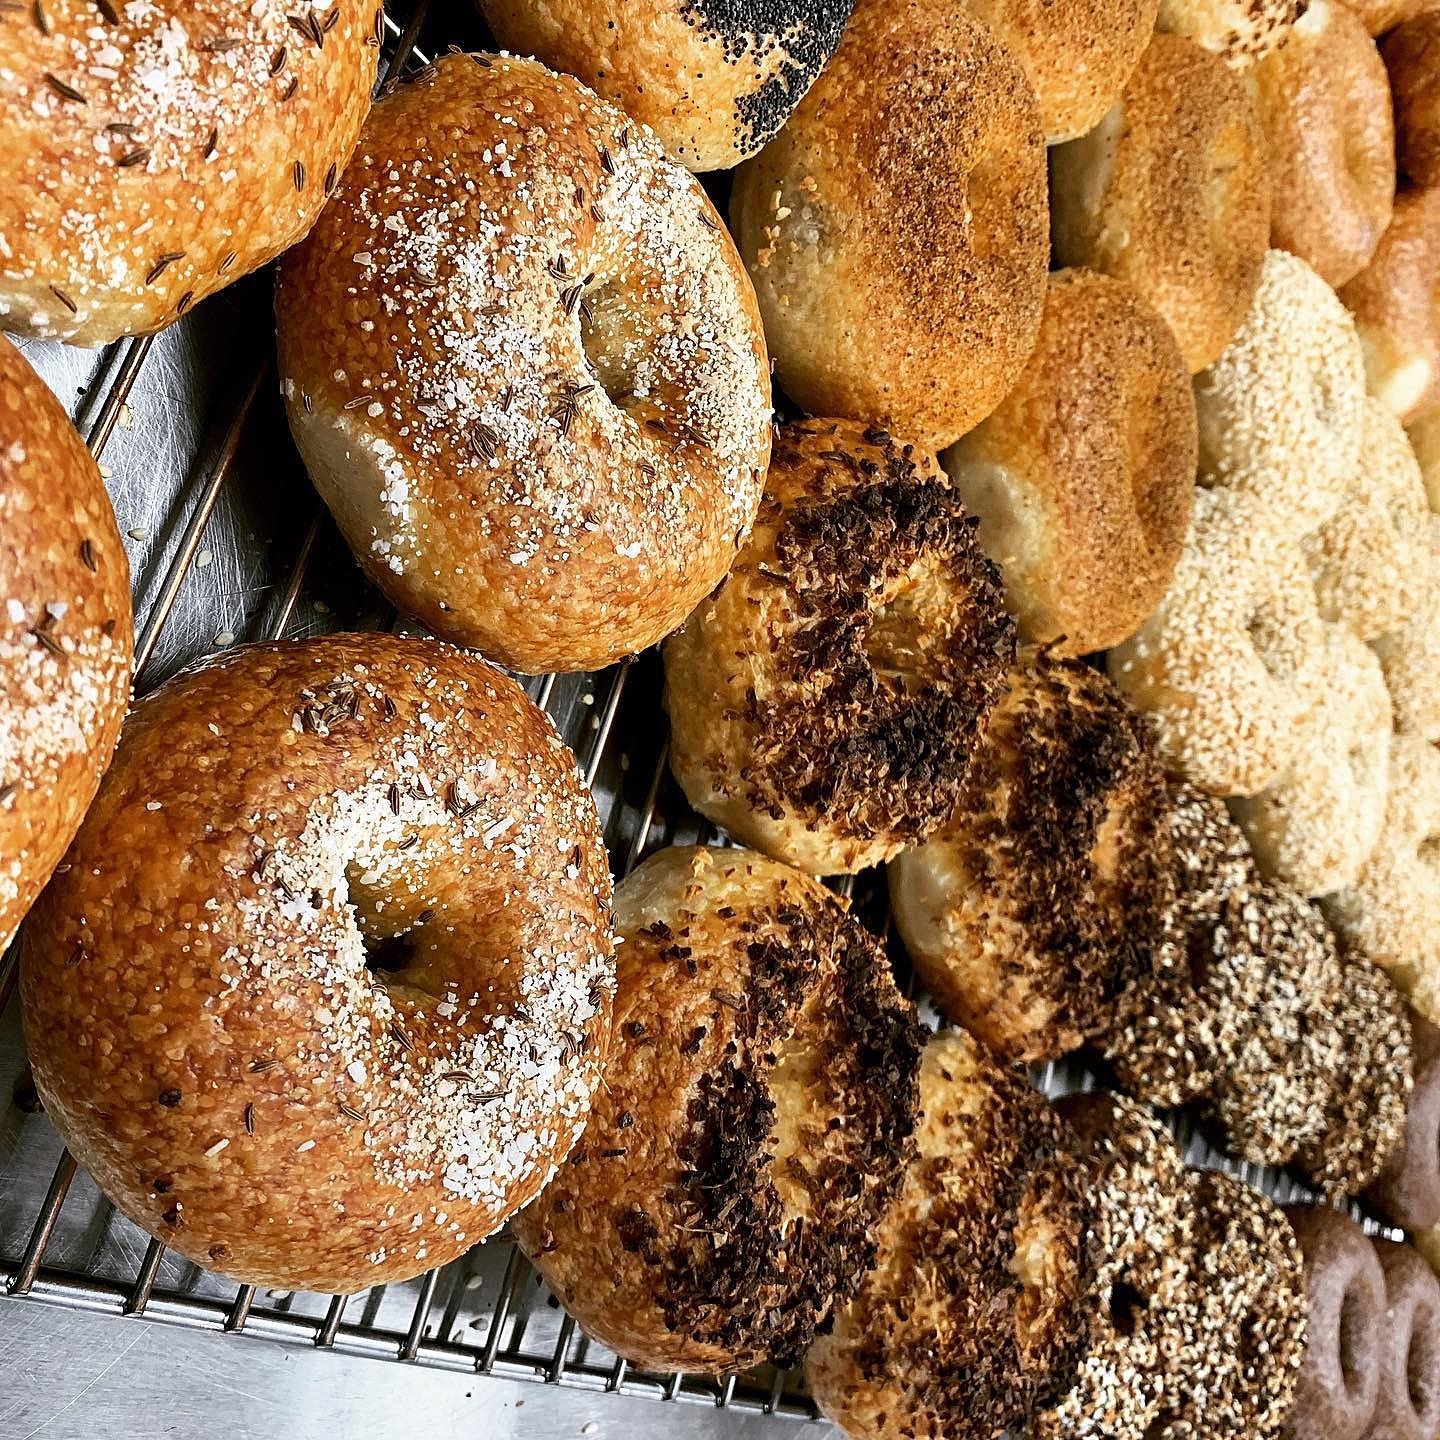 An East Coast Bagel Shop is Going to Be Visiting Cedar Rapids